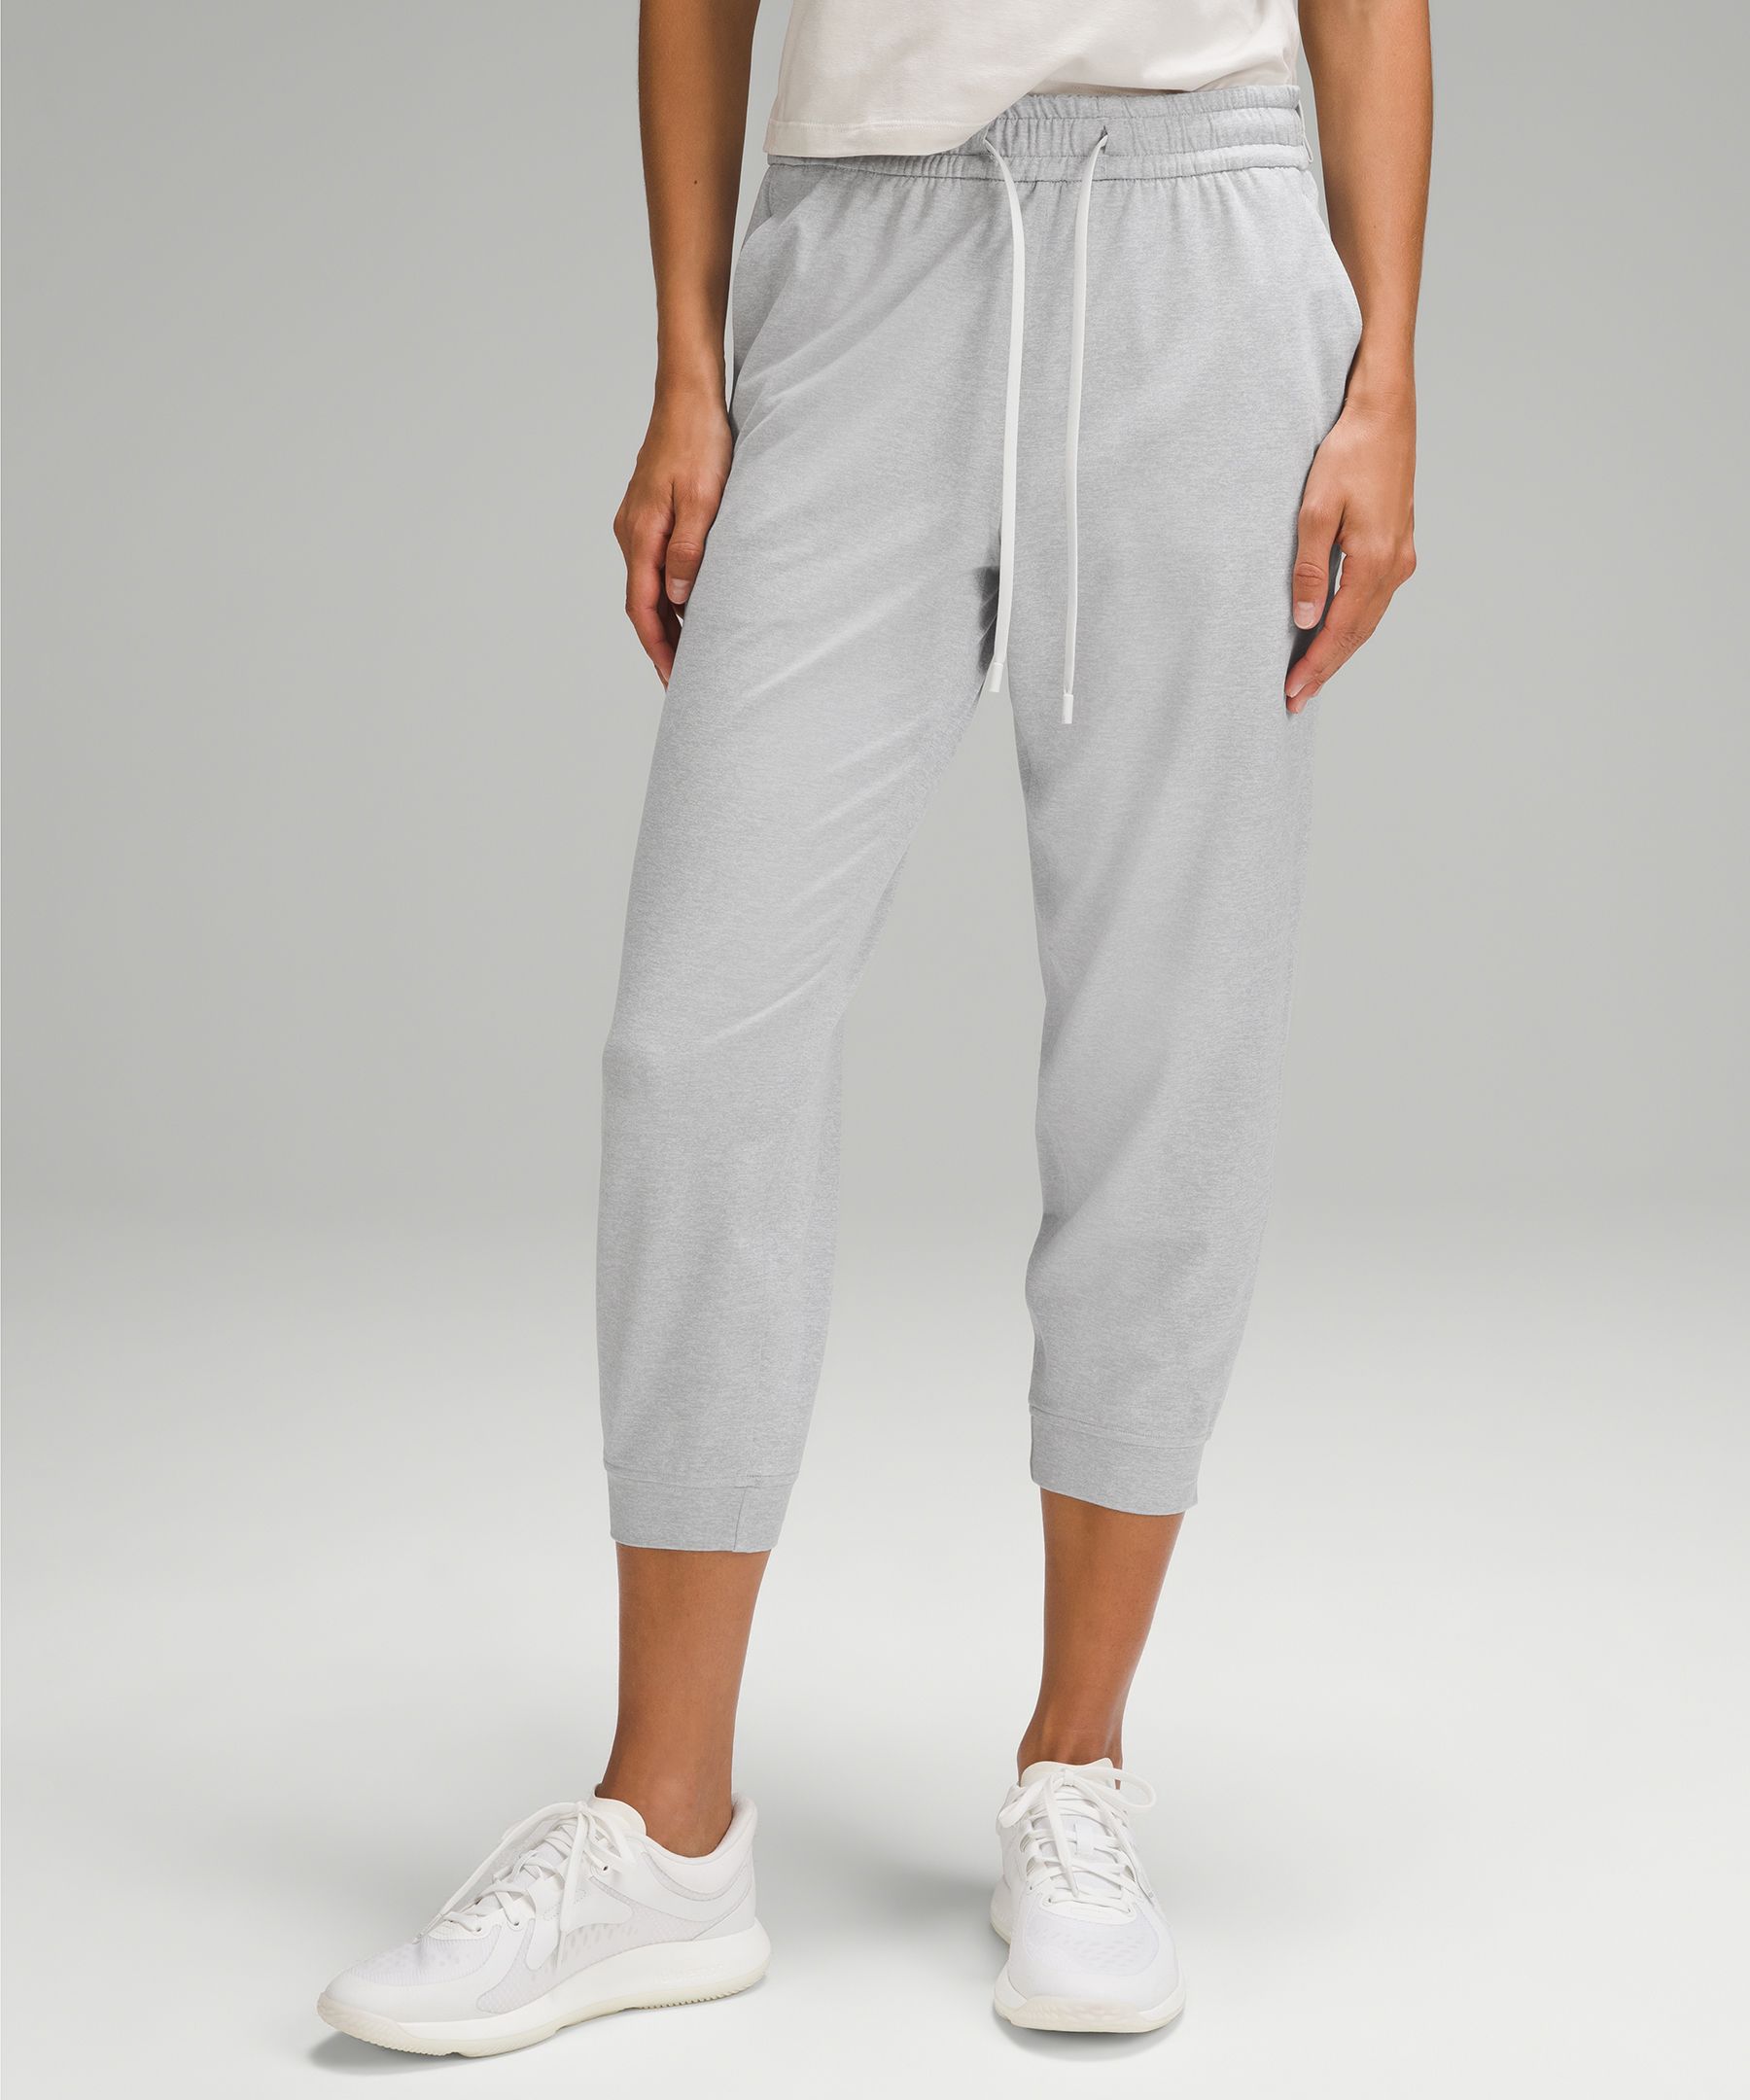 Lululemons soft jersey fit mid rise jogger is the perfect length